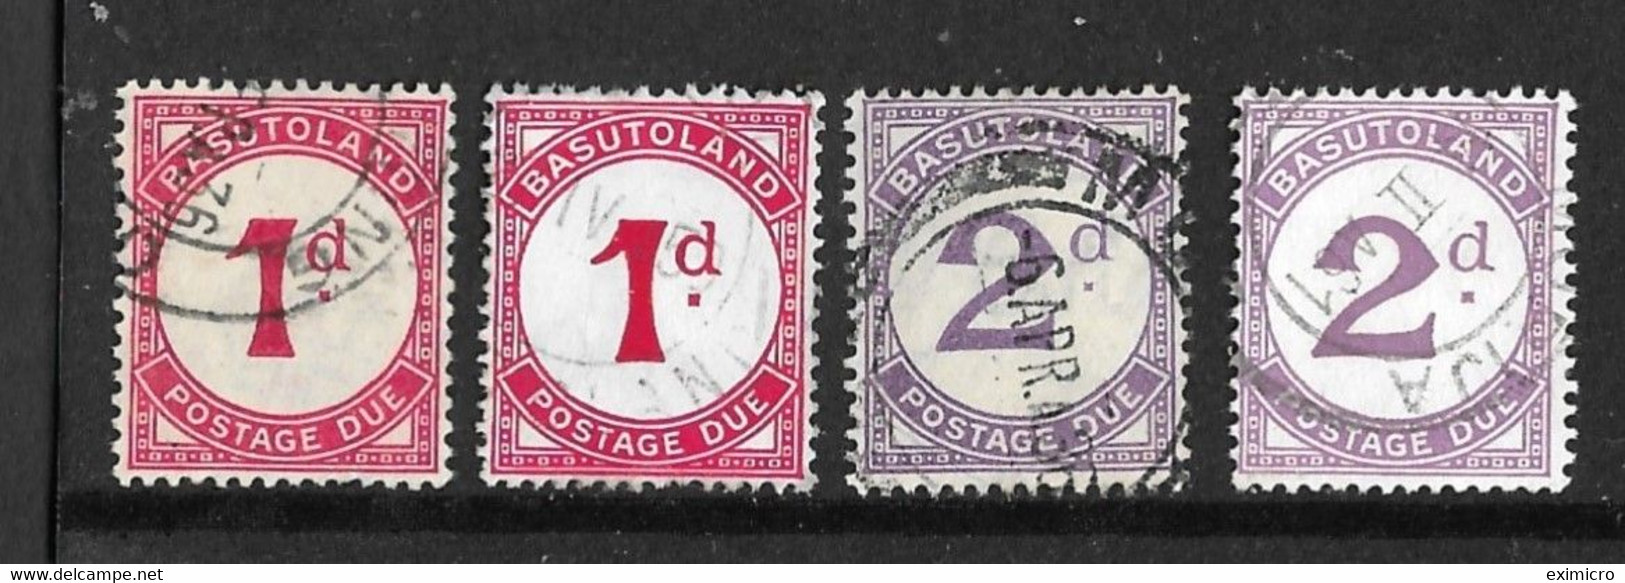 BASUTOLAND 1933 - 1952 POSTAGE DUE SET SG D1, D1b, D2, D2a BOTH ORDINARY AND CHALK-SURFACED PAPERS FINE USED Cat £92 - Impuestos